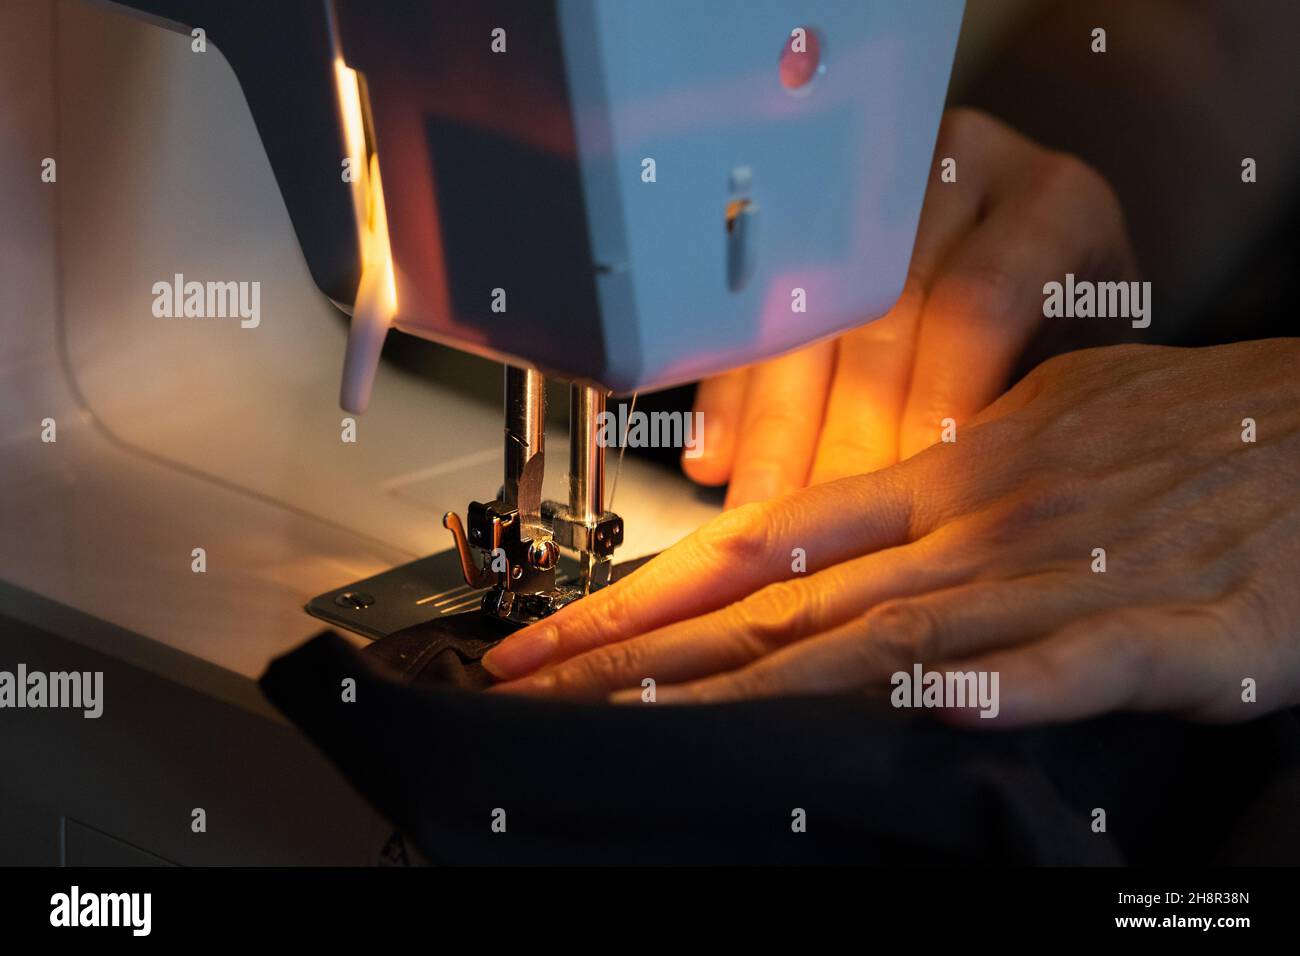 woman's hands sew on a sewing machine, close up, working process Stock Photo